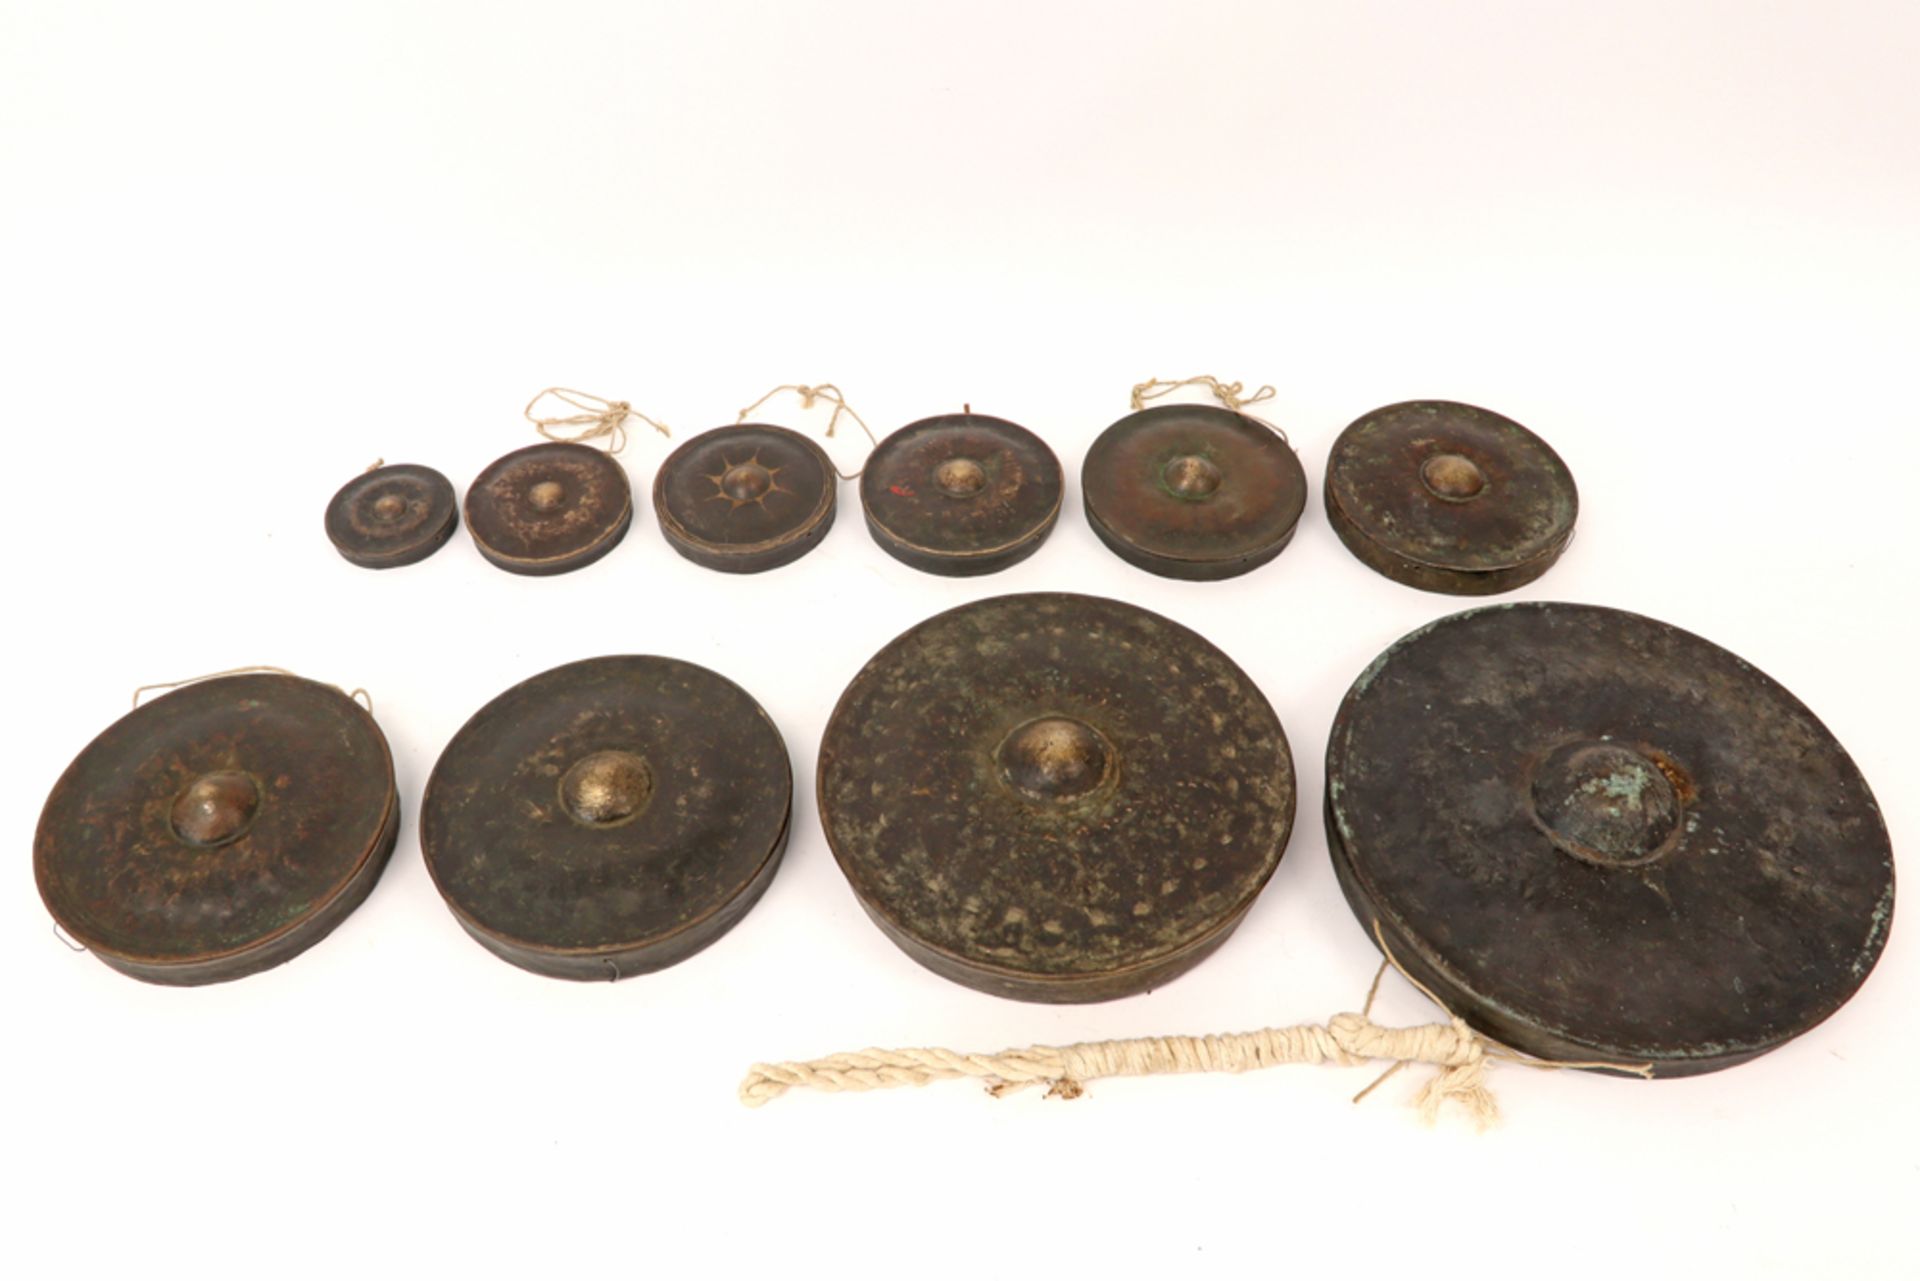 set of ten Northern Indian Naga gongs, used during ceremonial dances, festivals and initiation rites